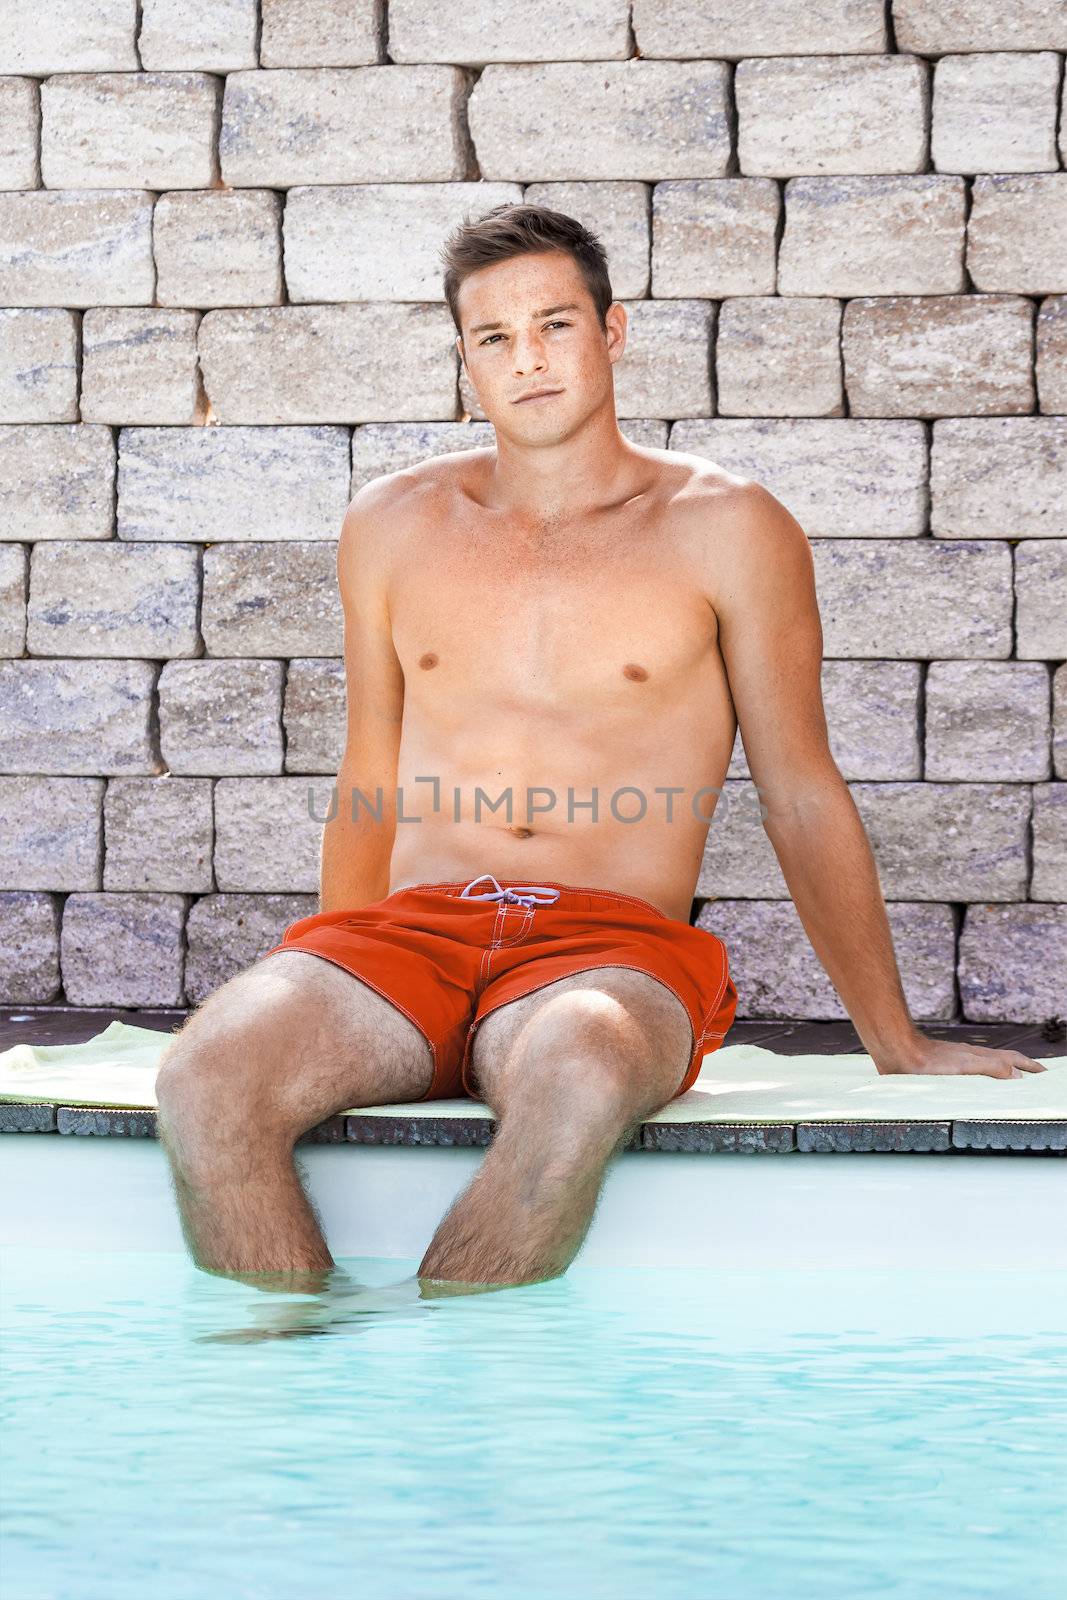 An image of a handsame man relaxing at the pool